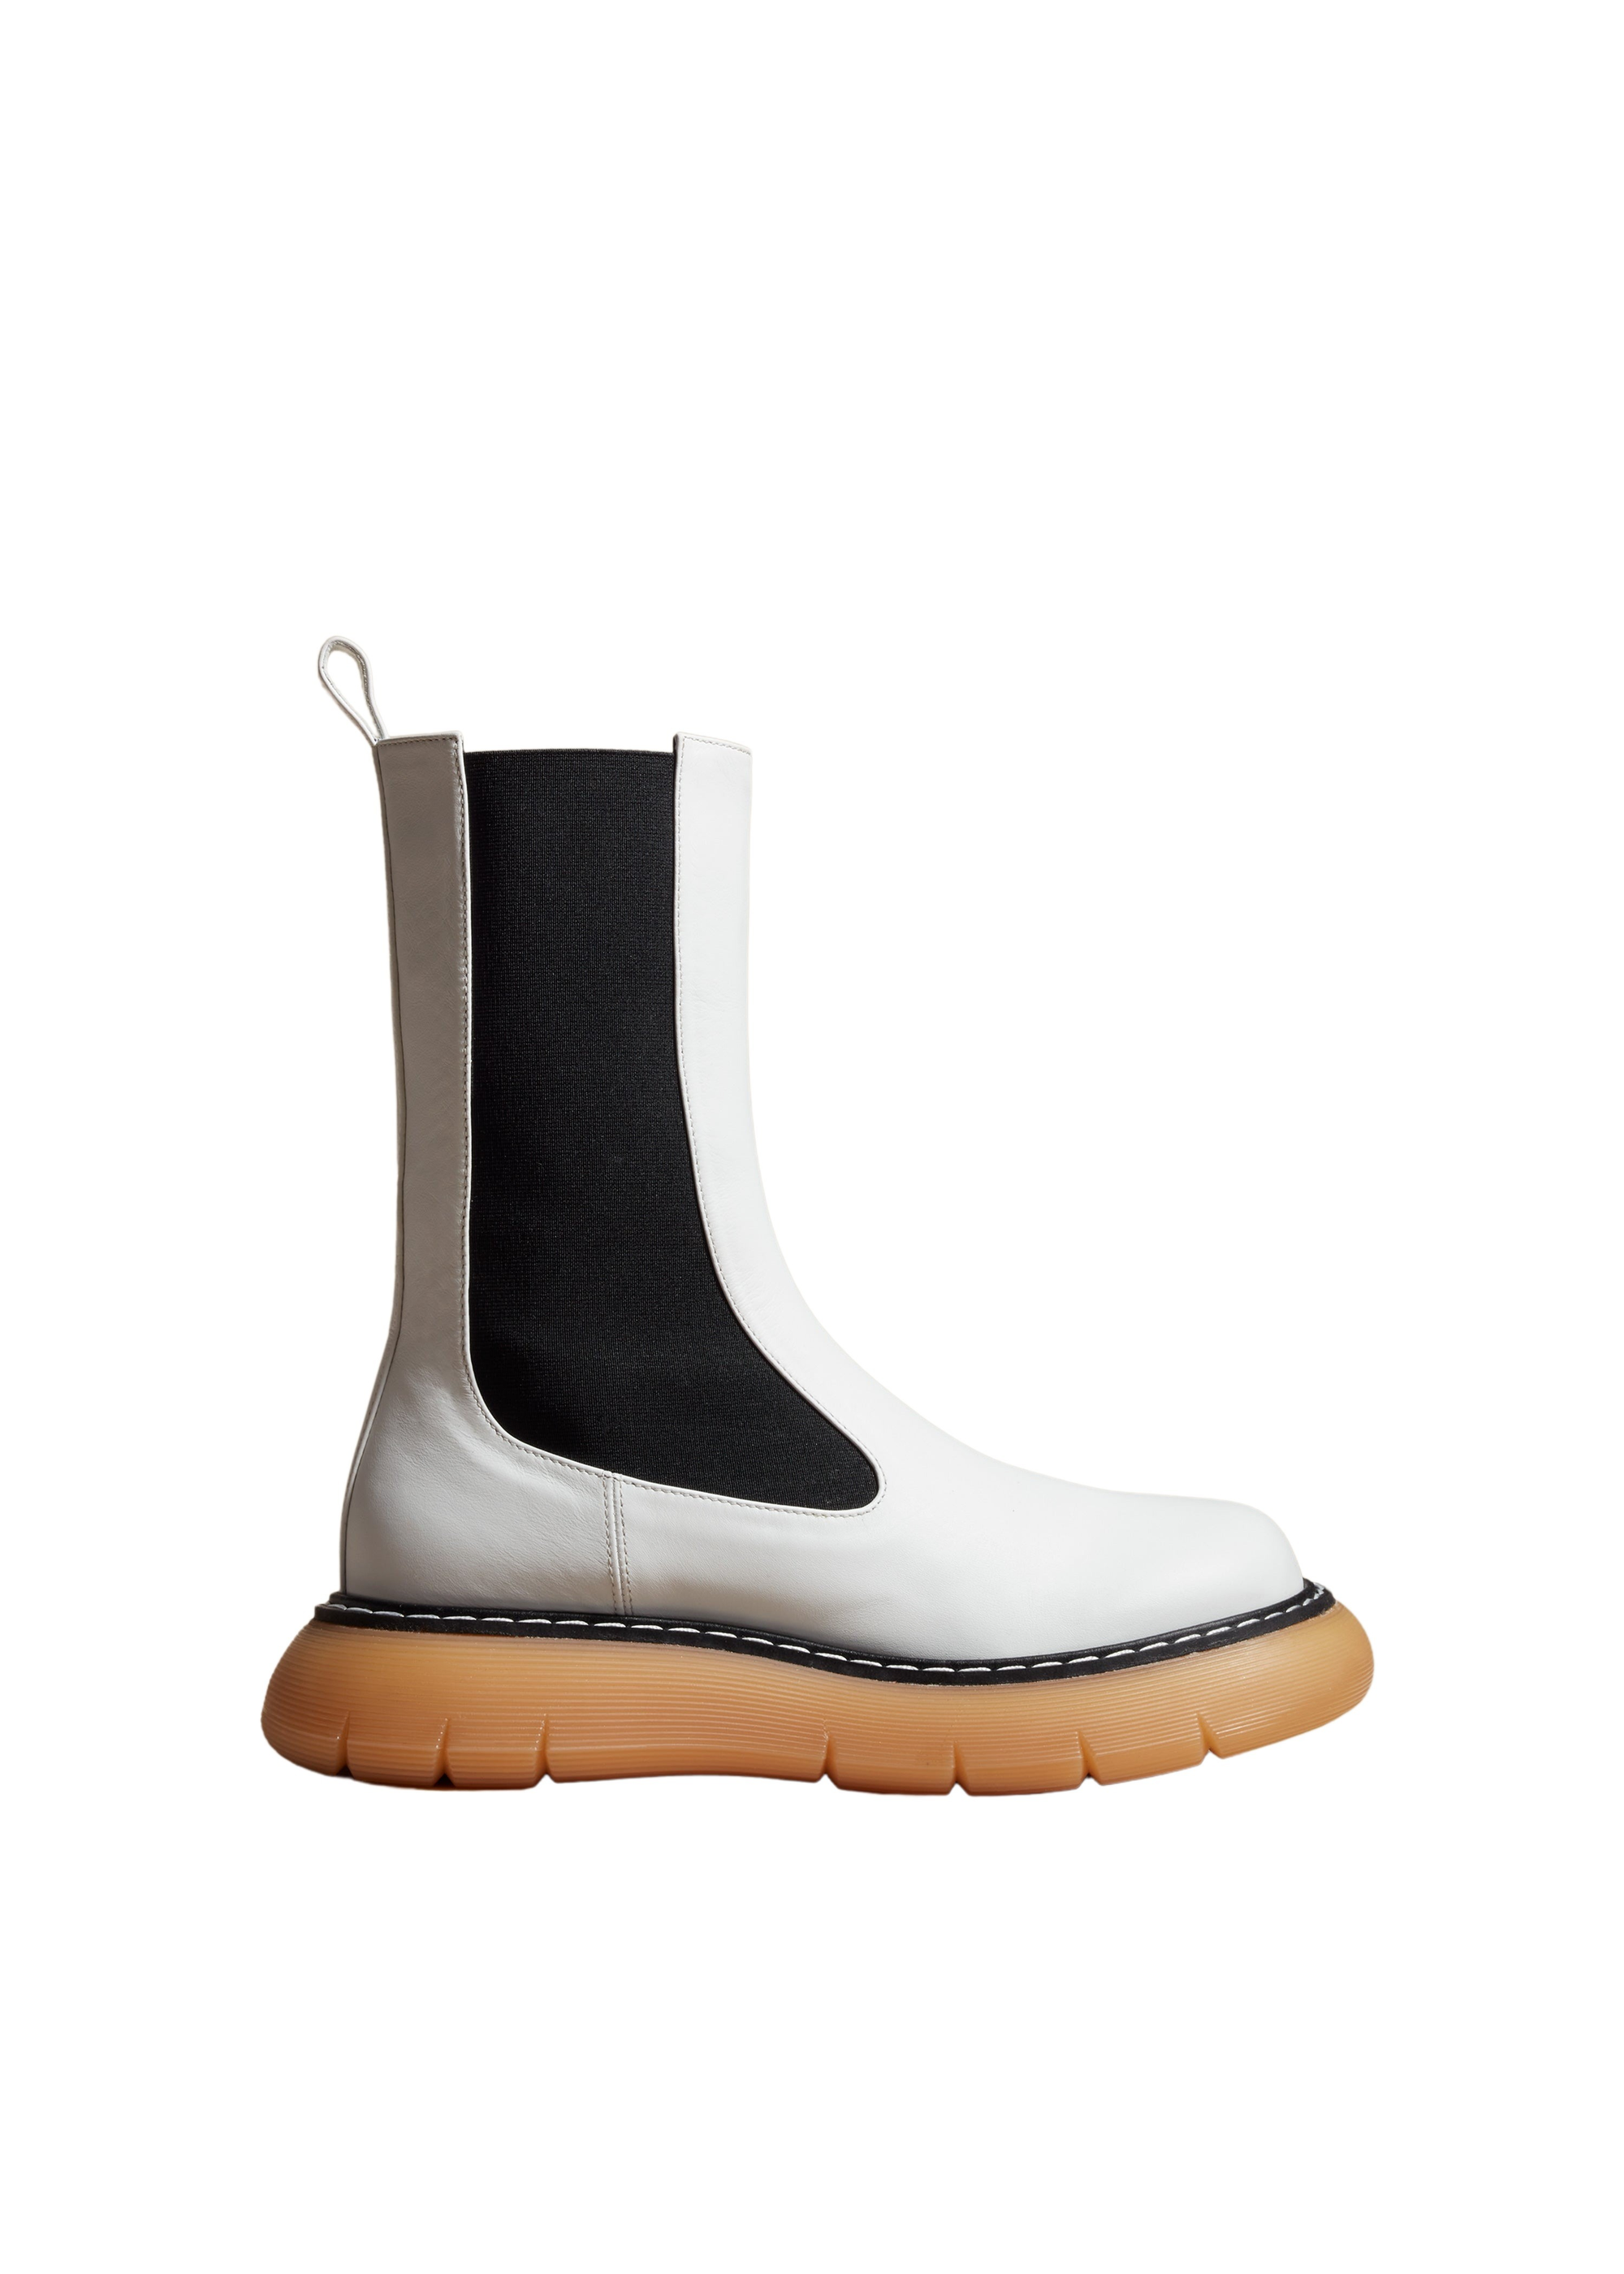 Bleecker boot in leather - White